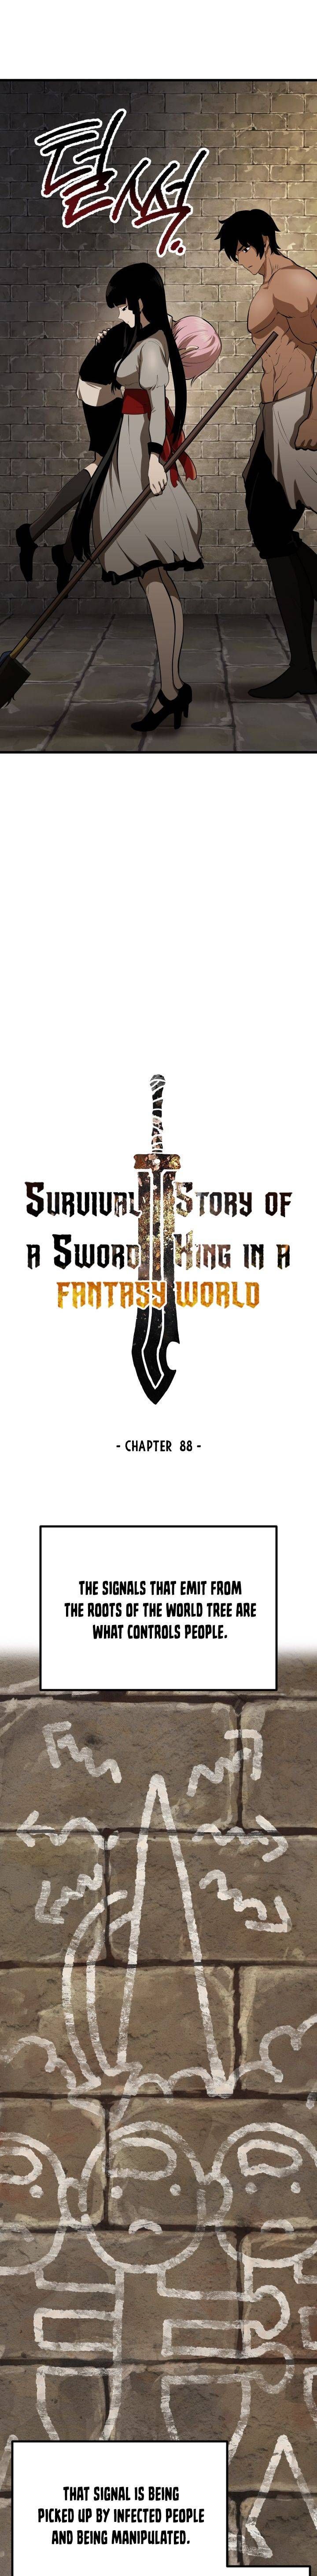 survival_story_of_a_sword_king_in_a_fantasy_world_88_5